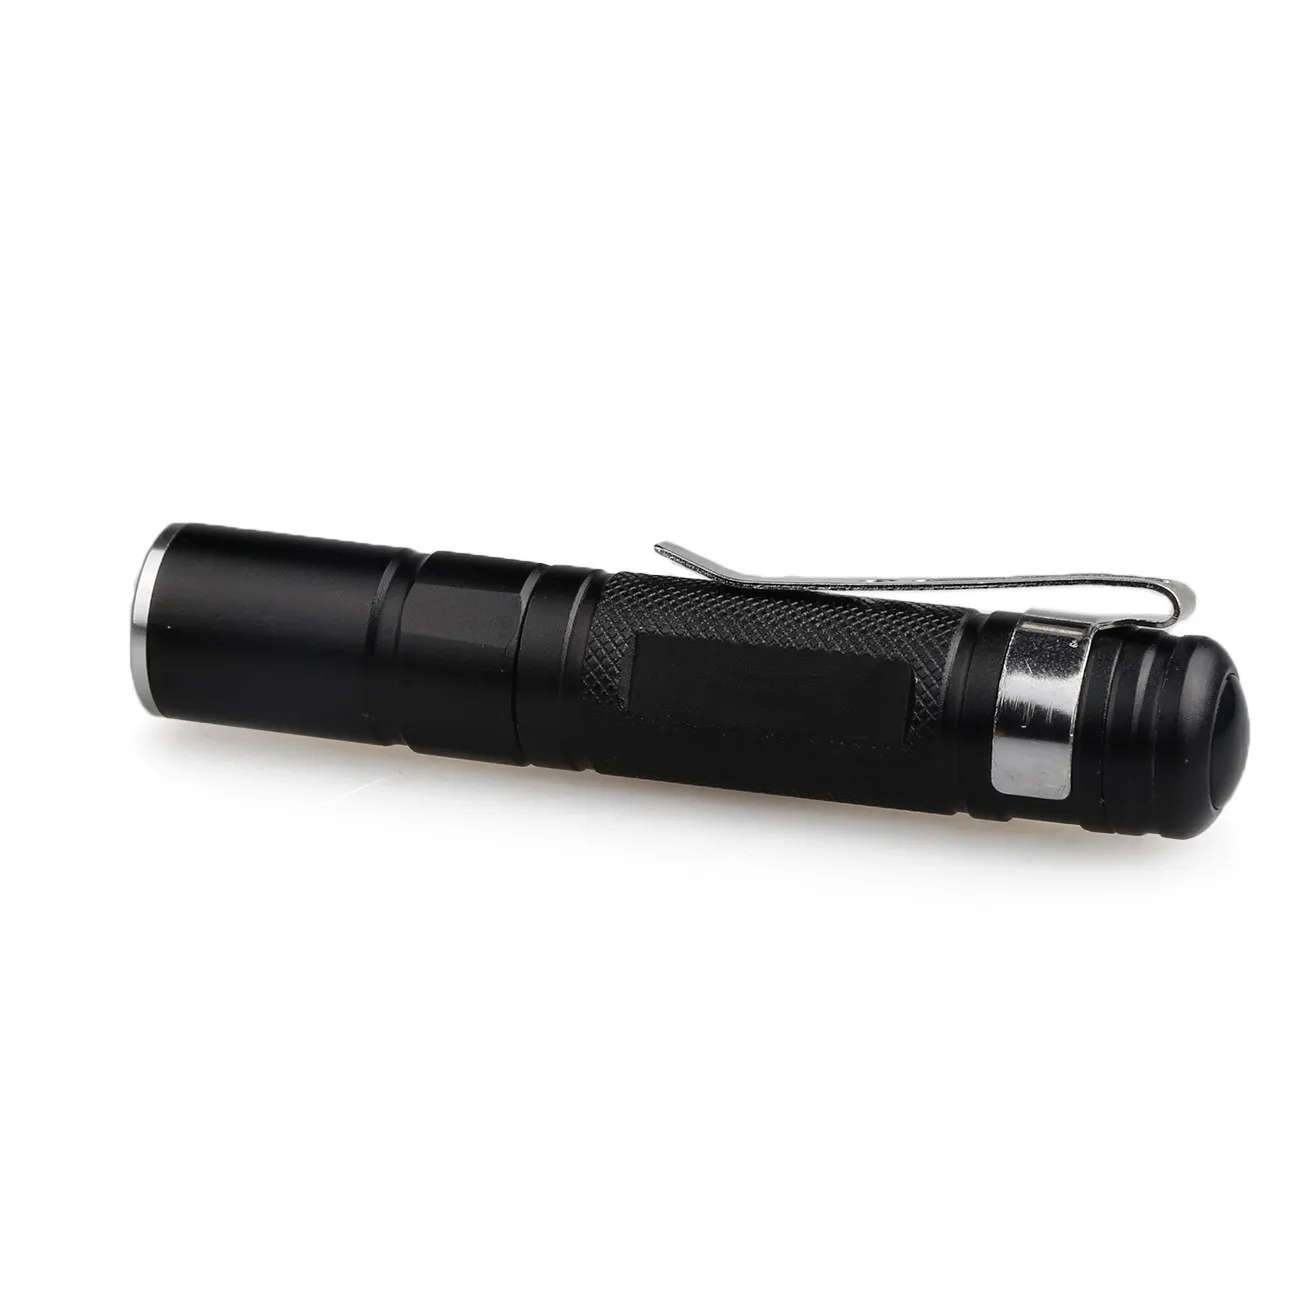 Perfect Super Mini 3000lm Zoomable Cree Q5 Led Flashlight 3 Mode Torch Super Bright Light Lamp Outdoor Bicycle Accessories #N 8